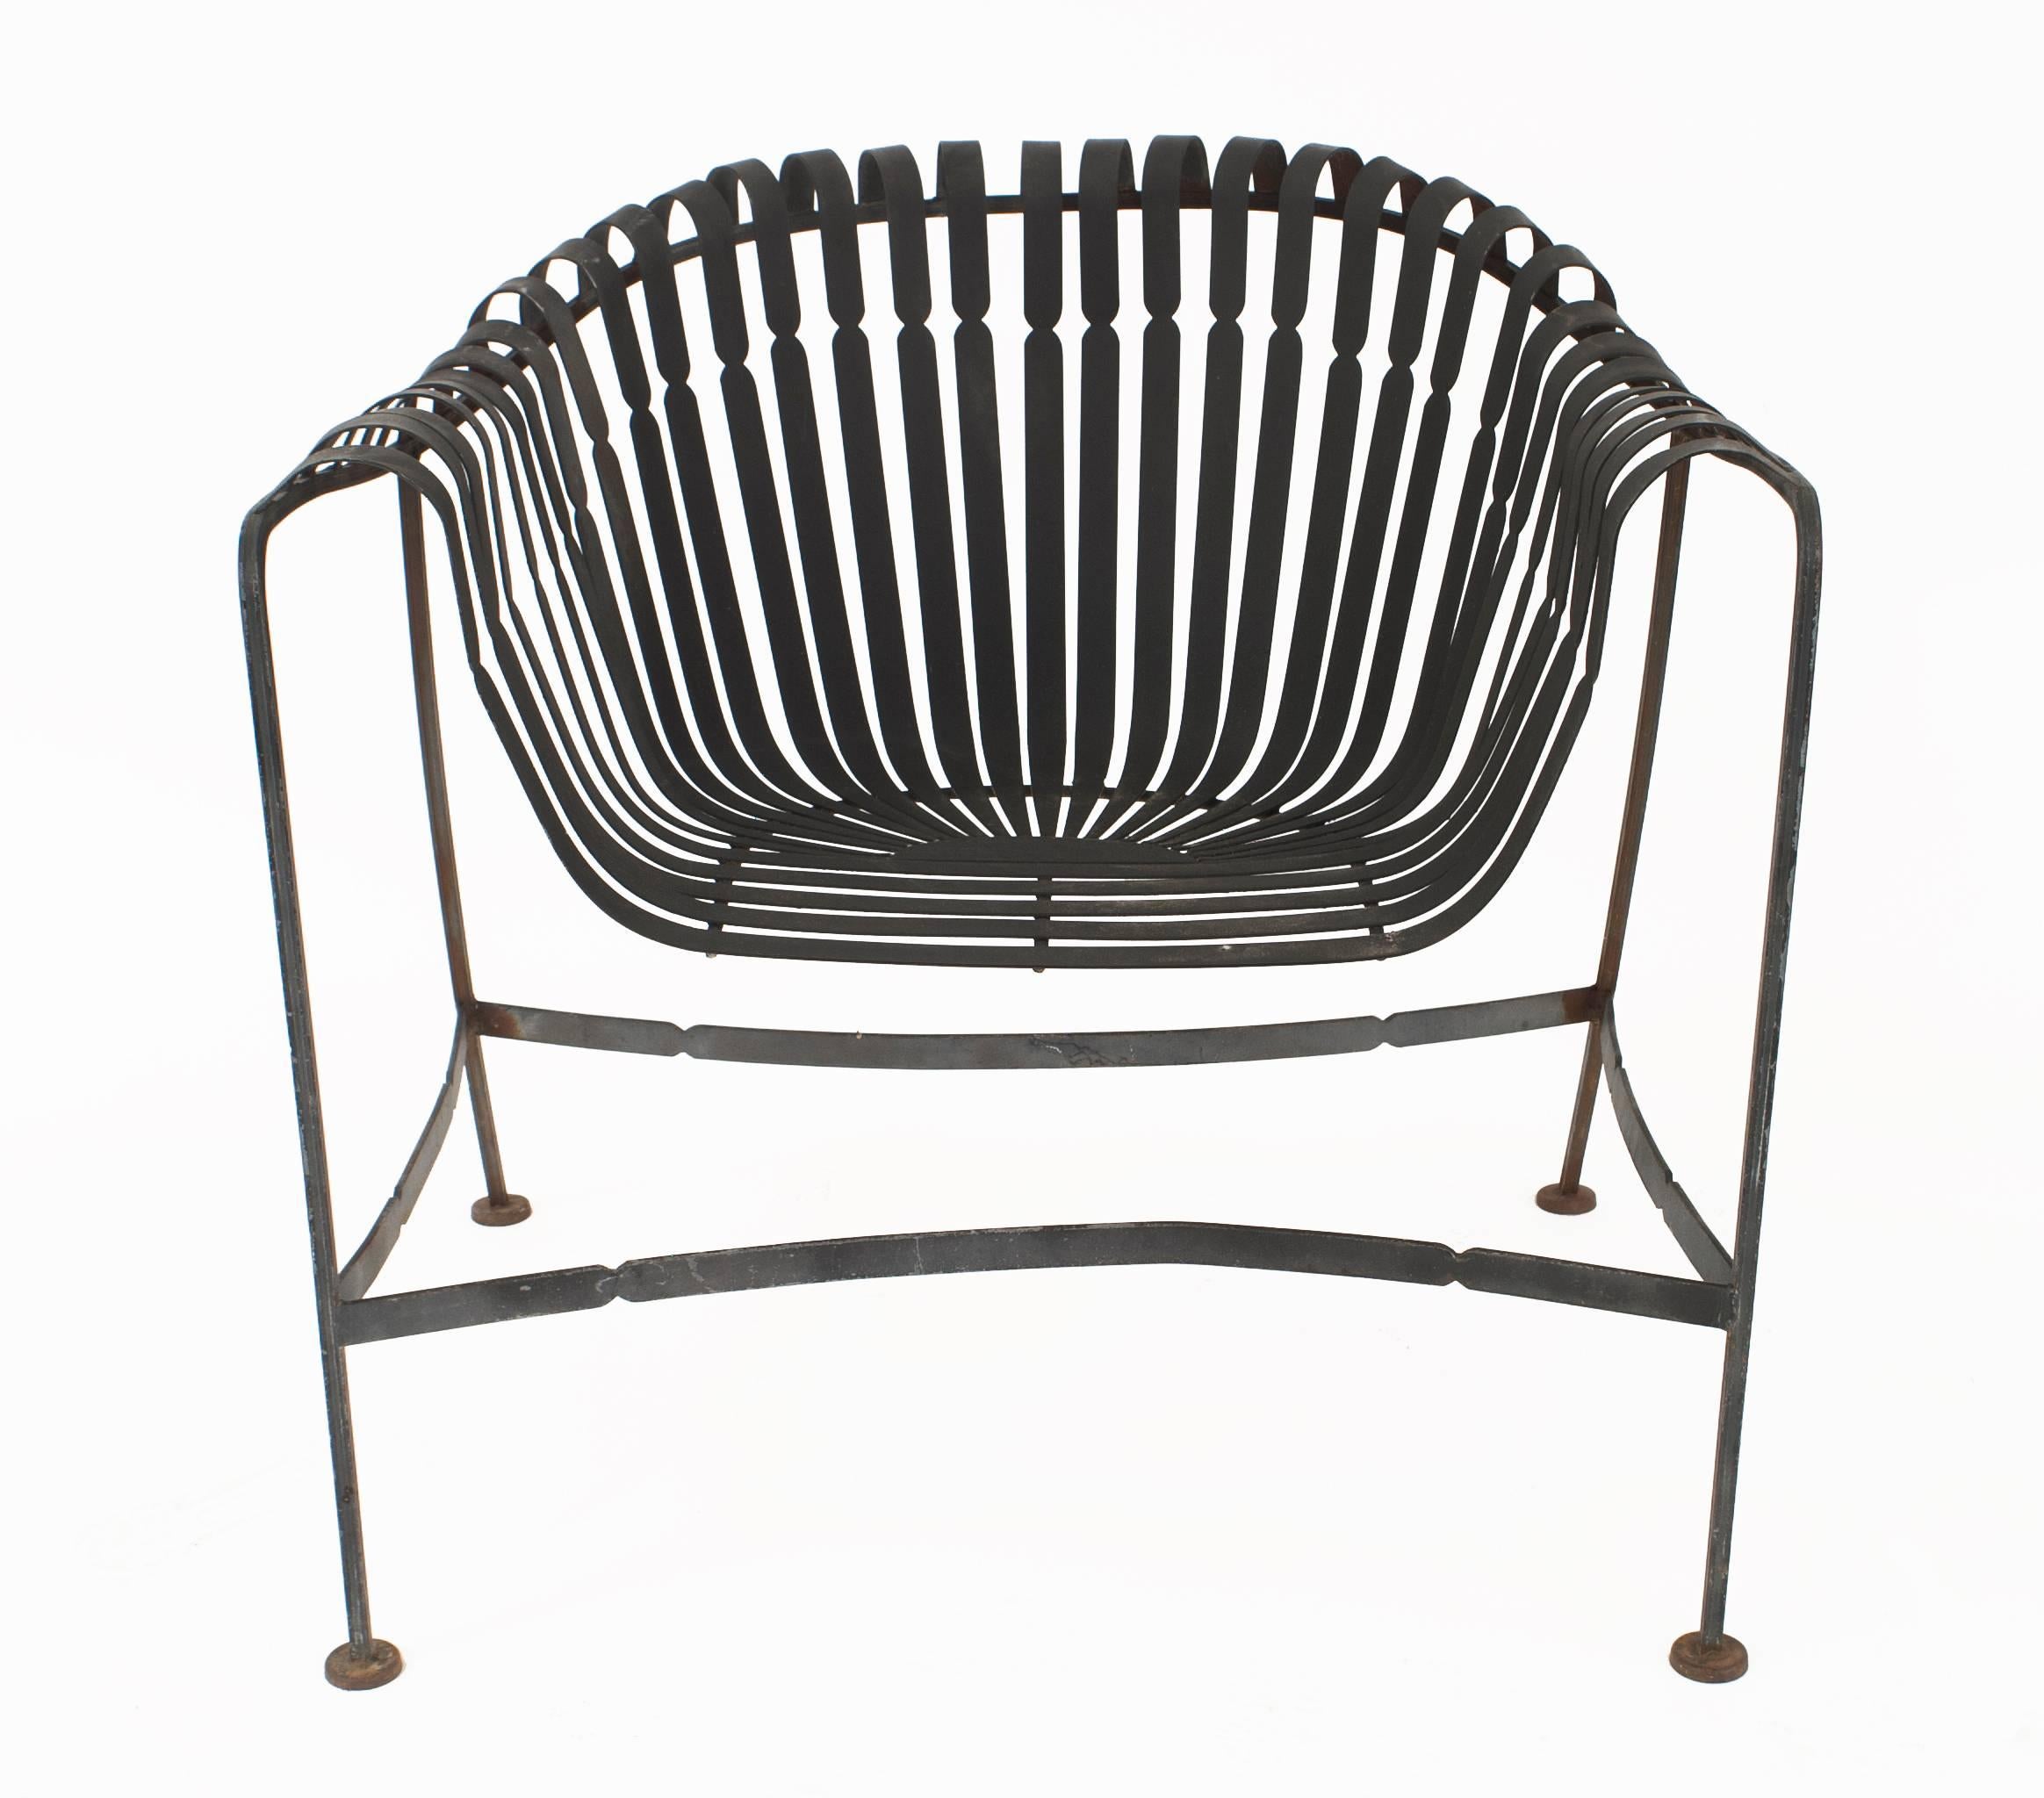 Set of Four American midcentury 1960's black enameled iron outdoor arm chairs with a scoop seat bent slat design, by Russell Woodard.


For over 150 years, Woodard craftsmen have designed and manufactured products loyal to the timeless art of